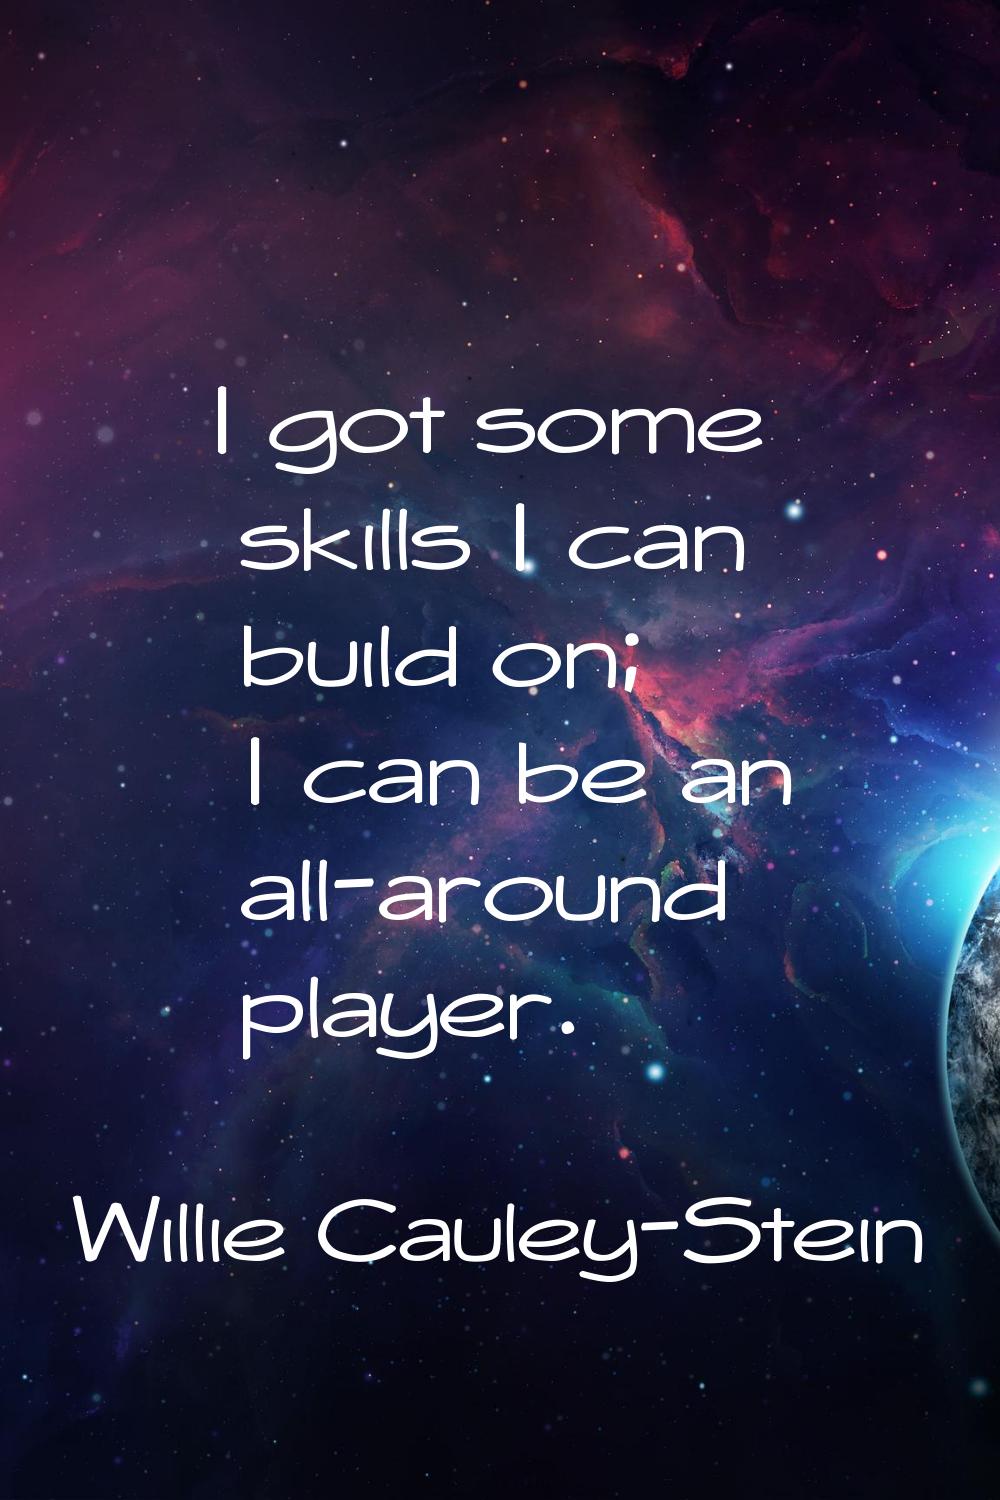 I got some skills I can build on; I can be an all-around player.